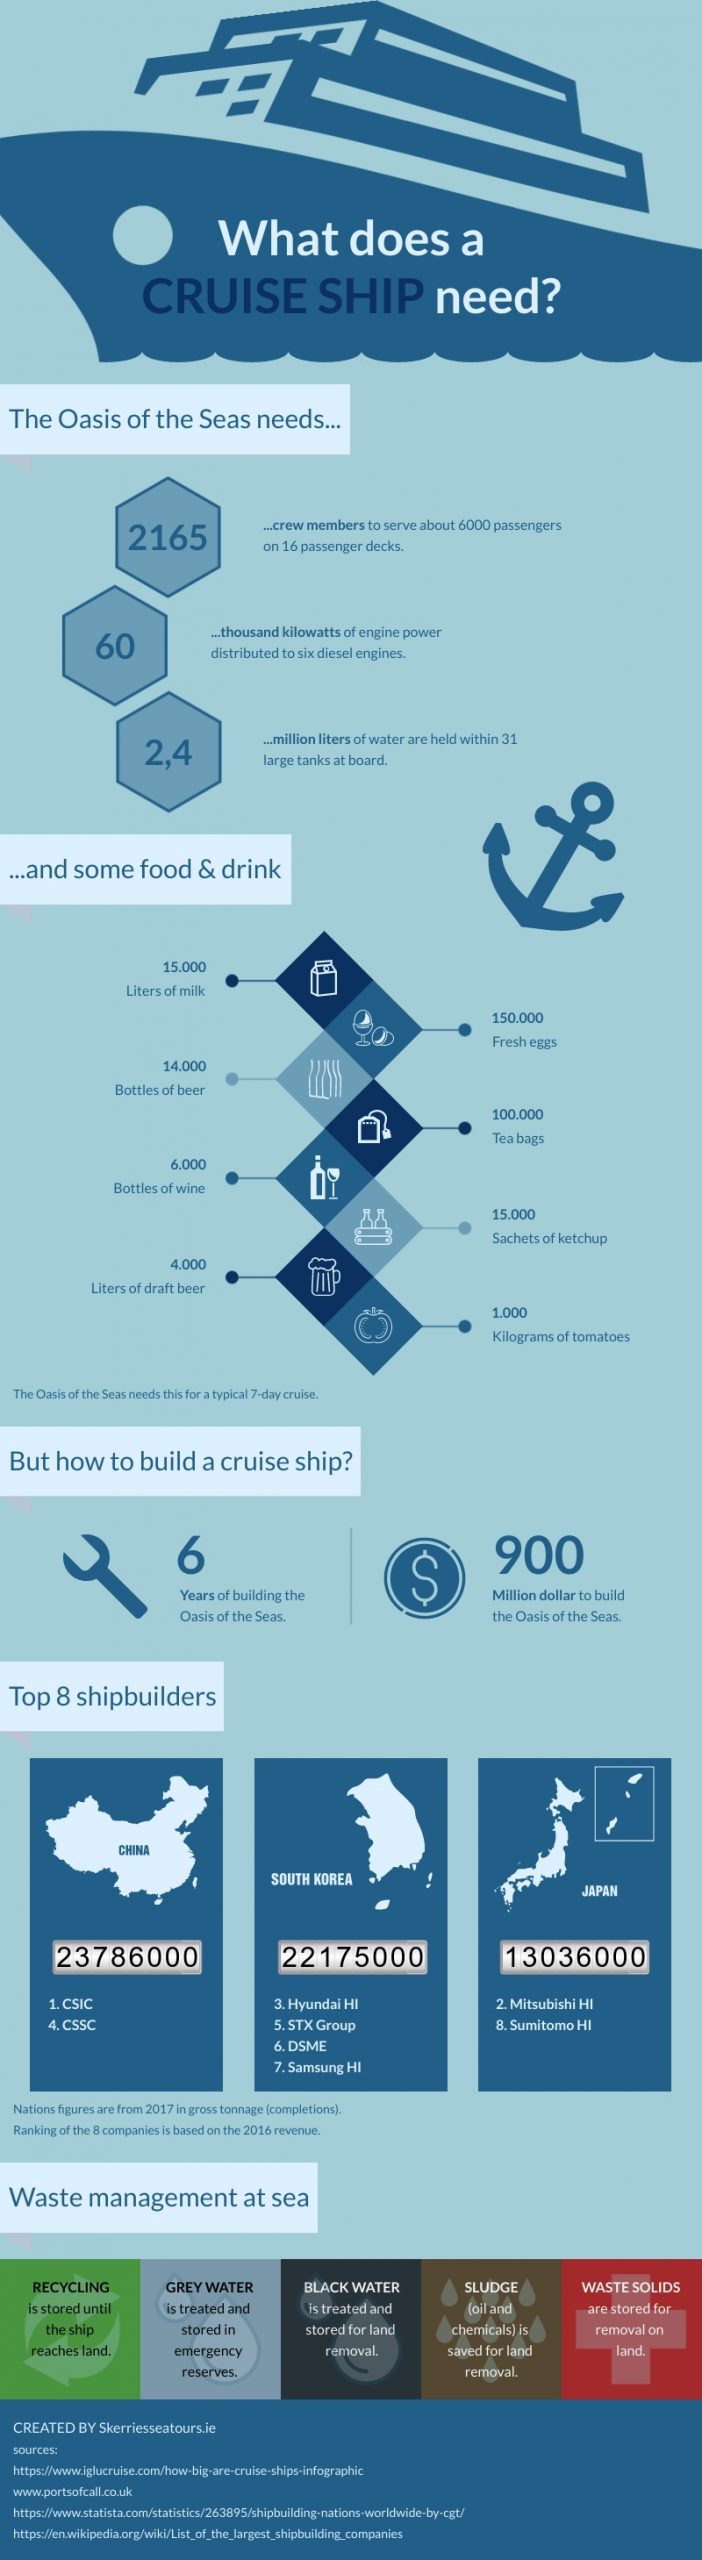 What does a cruise ship need infoghraphic